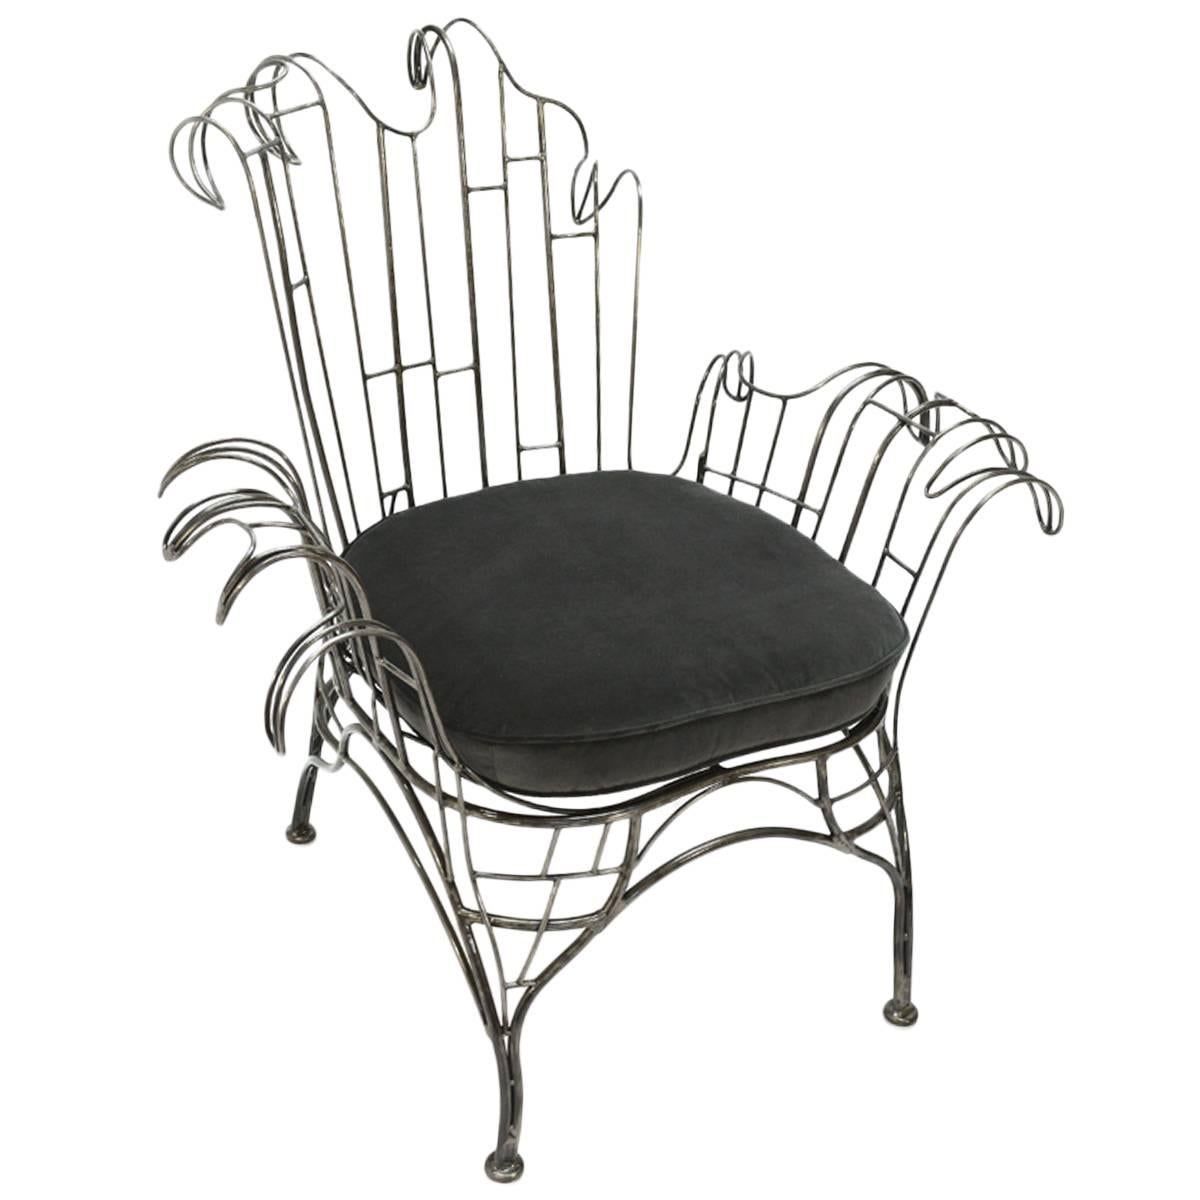 Organic Baroque Chair by Tony Duquette